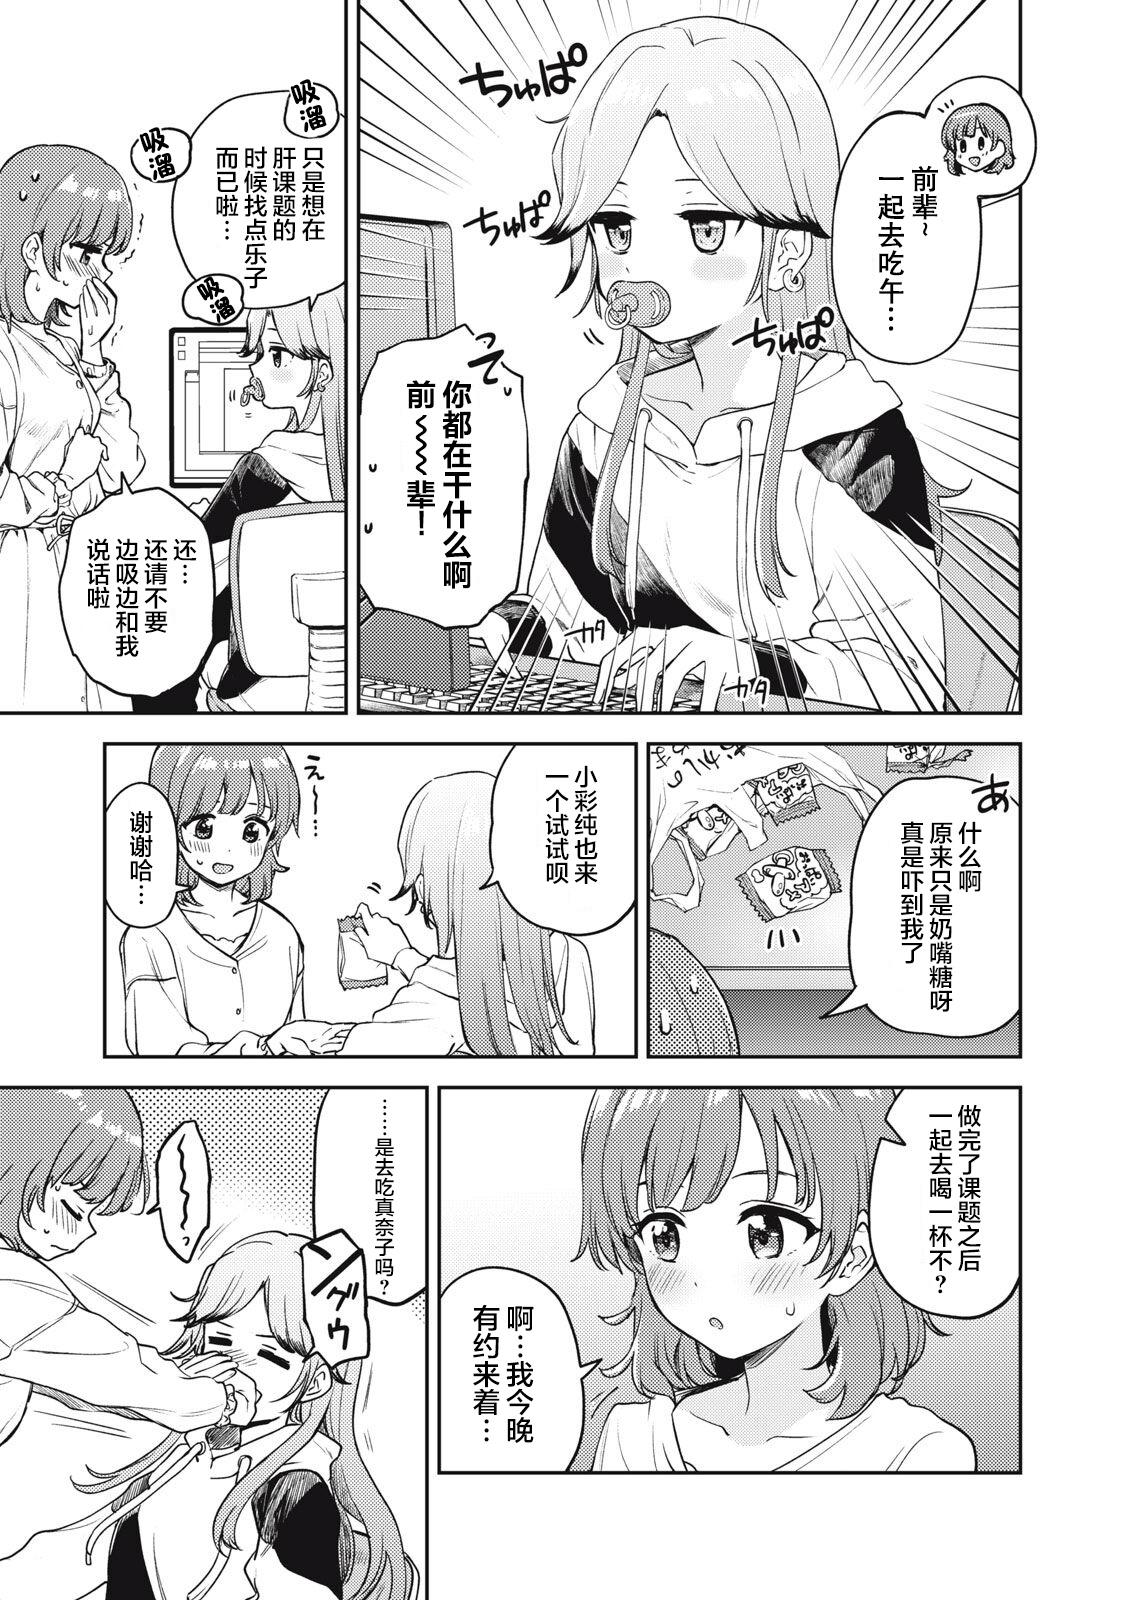 Facesitting Asumi-chan Is Interested In Lesbian Brothels! Extra Episode Seduction Porn - Page 1